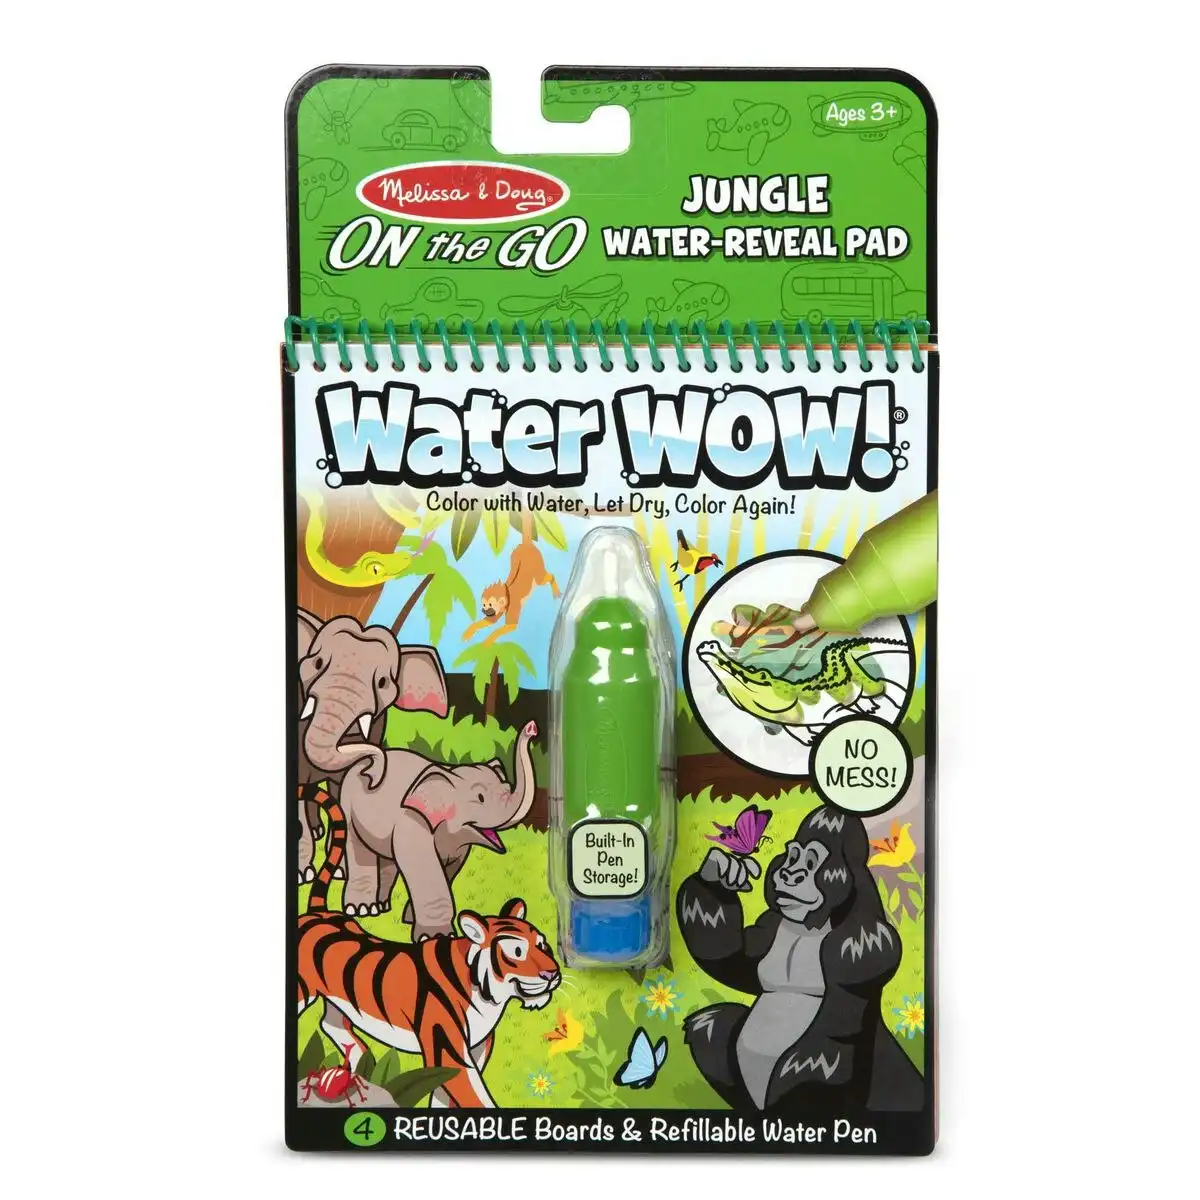 Melissa & Doug - Water Wow! Jungle Water-reveal Pad - On The Go Travel Activity